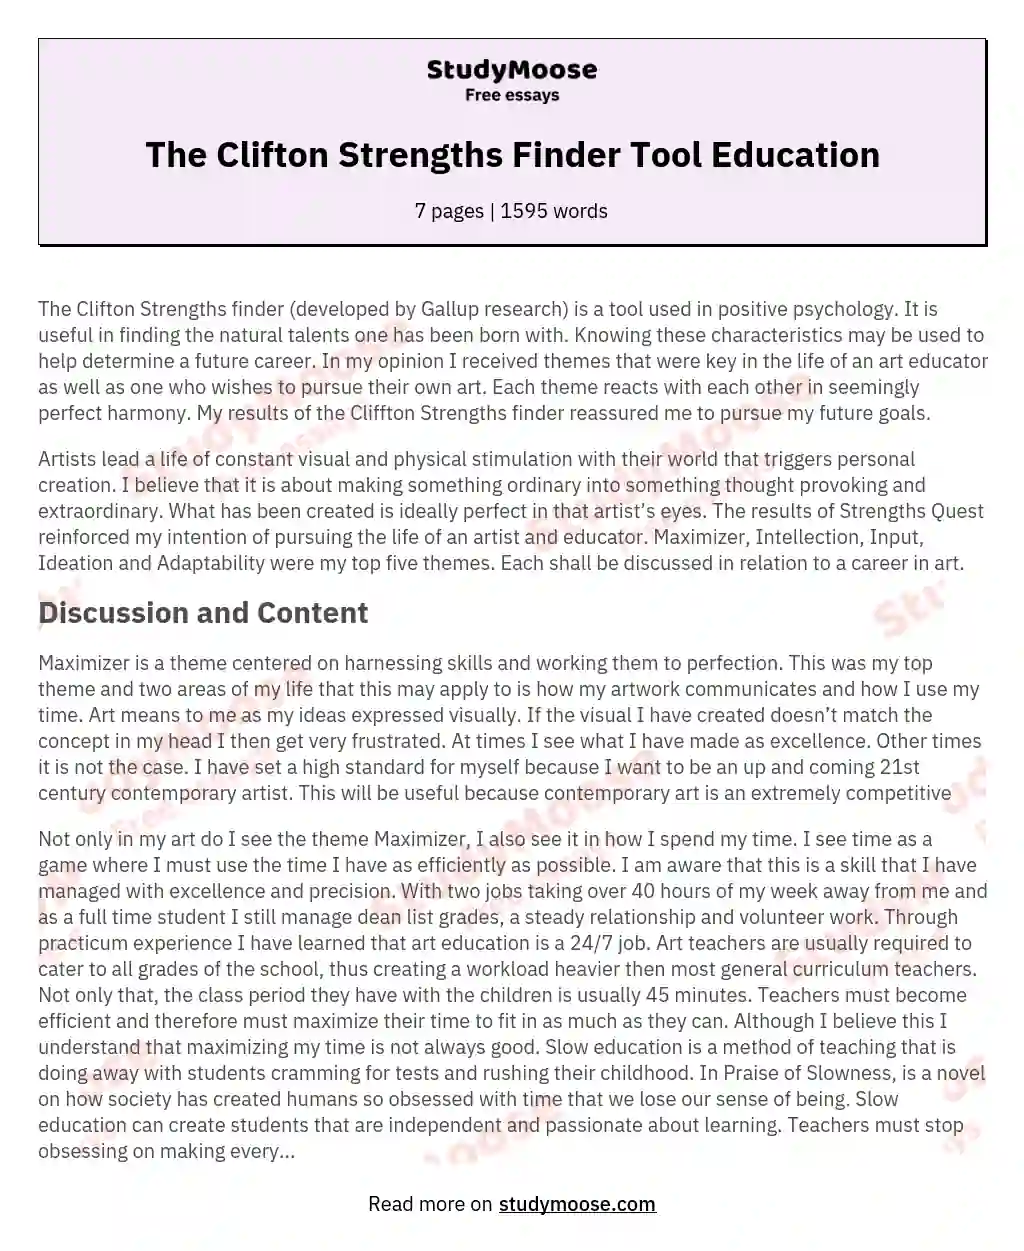 The Clifton Strengths Finder Tool Education essay